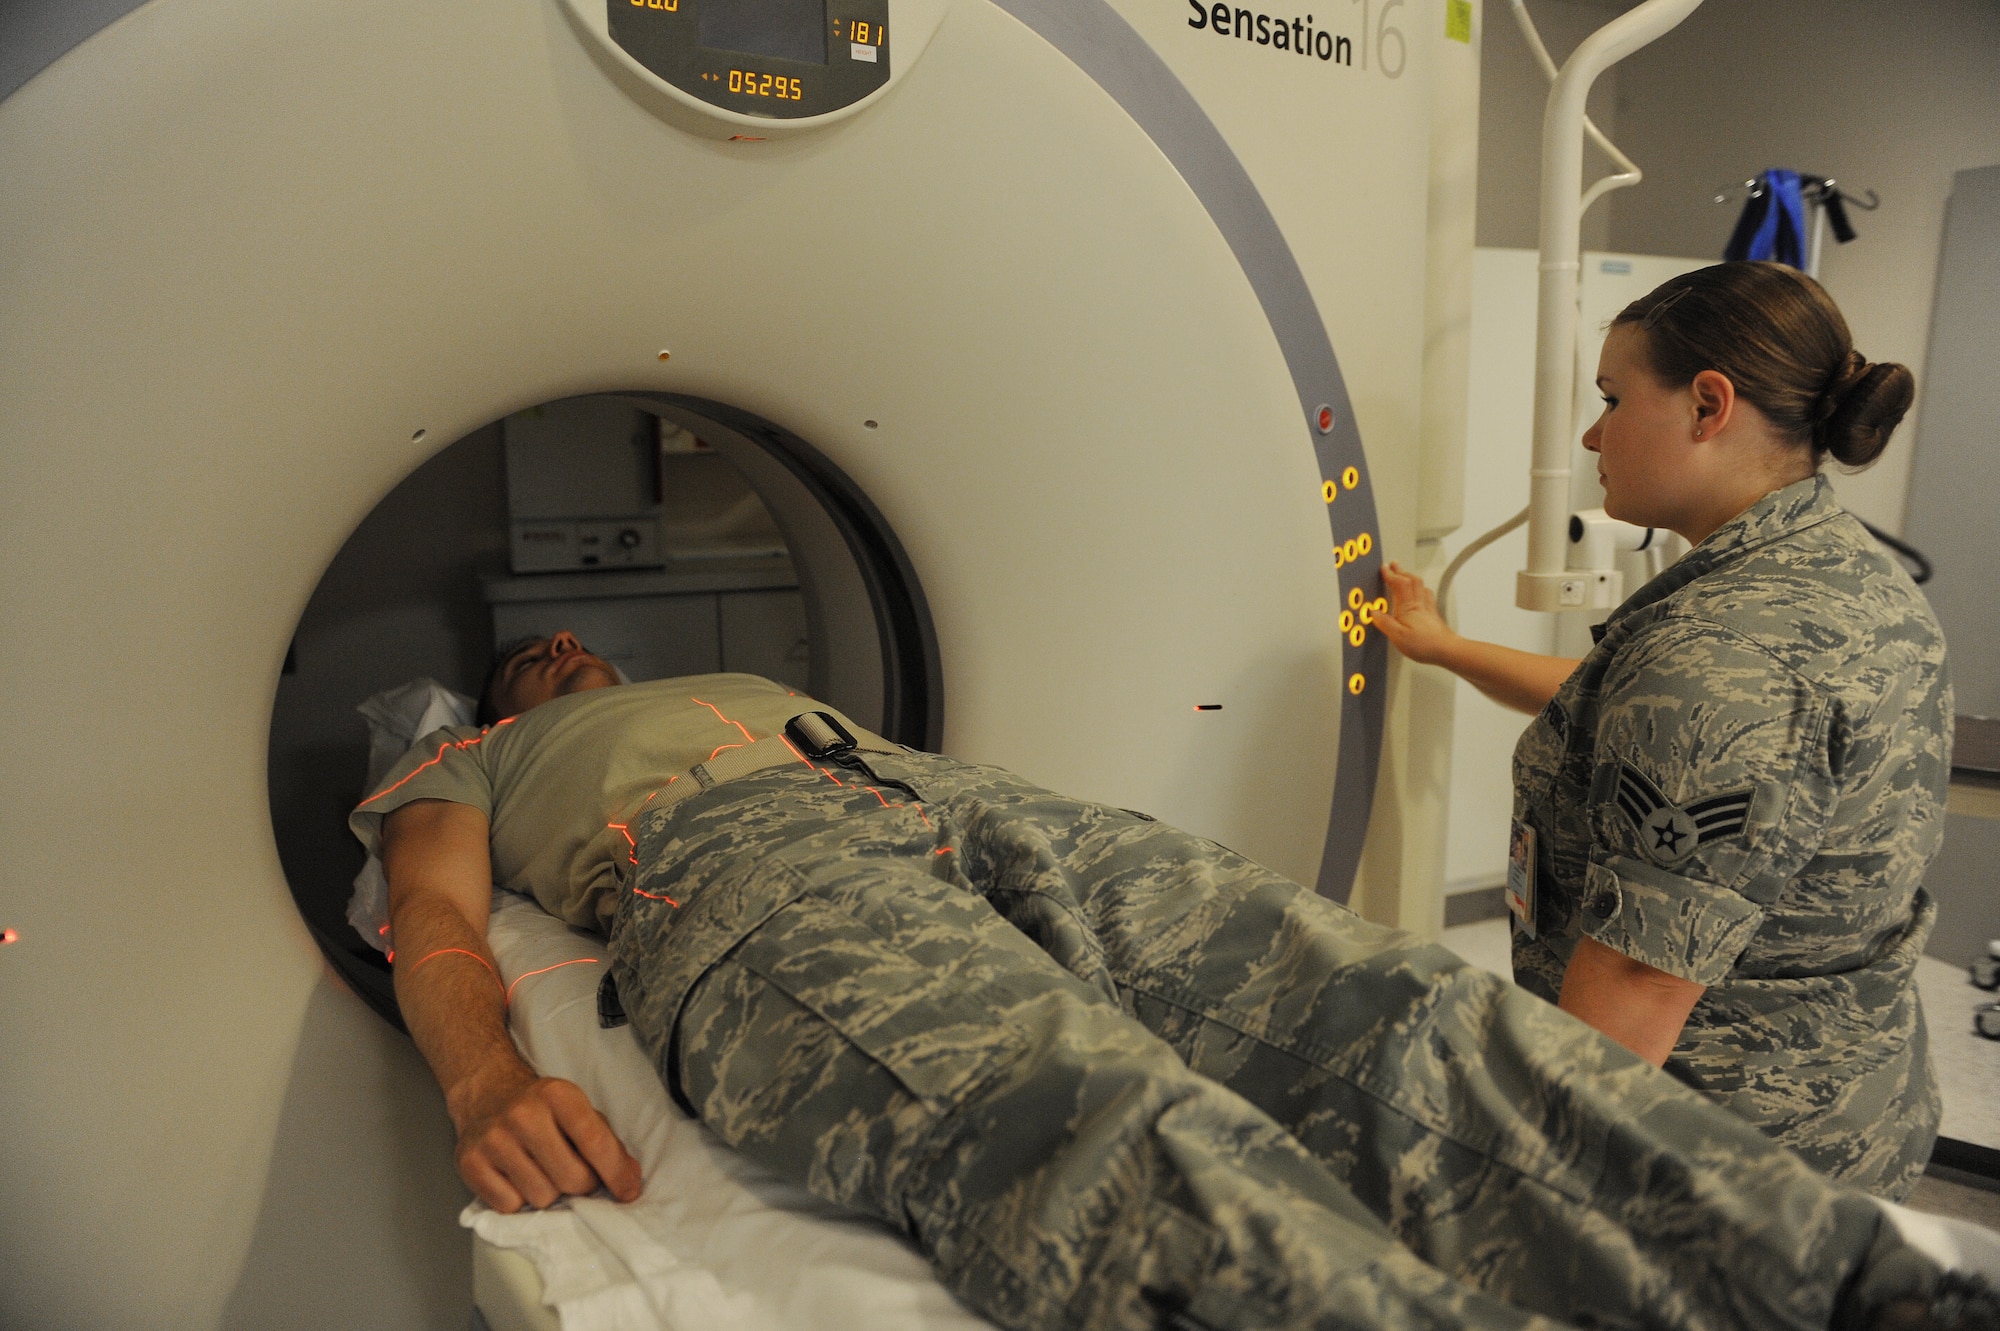 Senior Airman Casey Burch lines a patient up to a CT scanner at Scott Air Force Base, Ill., June 3, 2014.  A CT scan is a high-tech medical test that helps a radiologist diagnose different types of diseases.  Burch is a 375th Medical Support Squadron radiology technologist.  (U.S. Air Force photo by Staff Sgt. Maria Bowman)